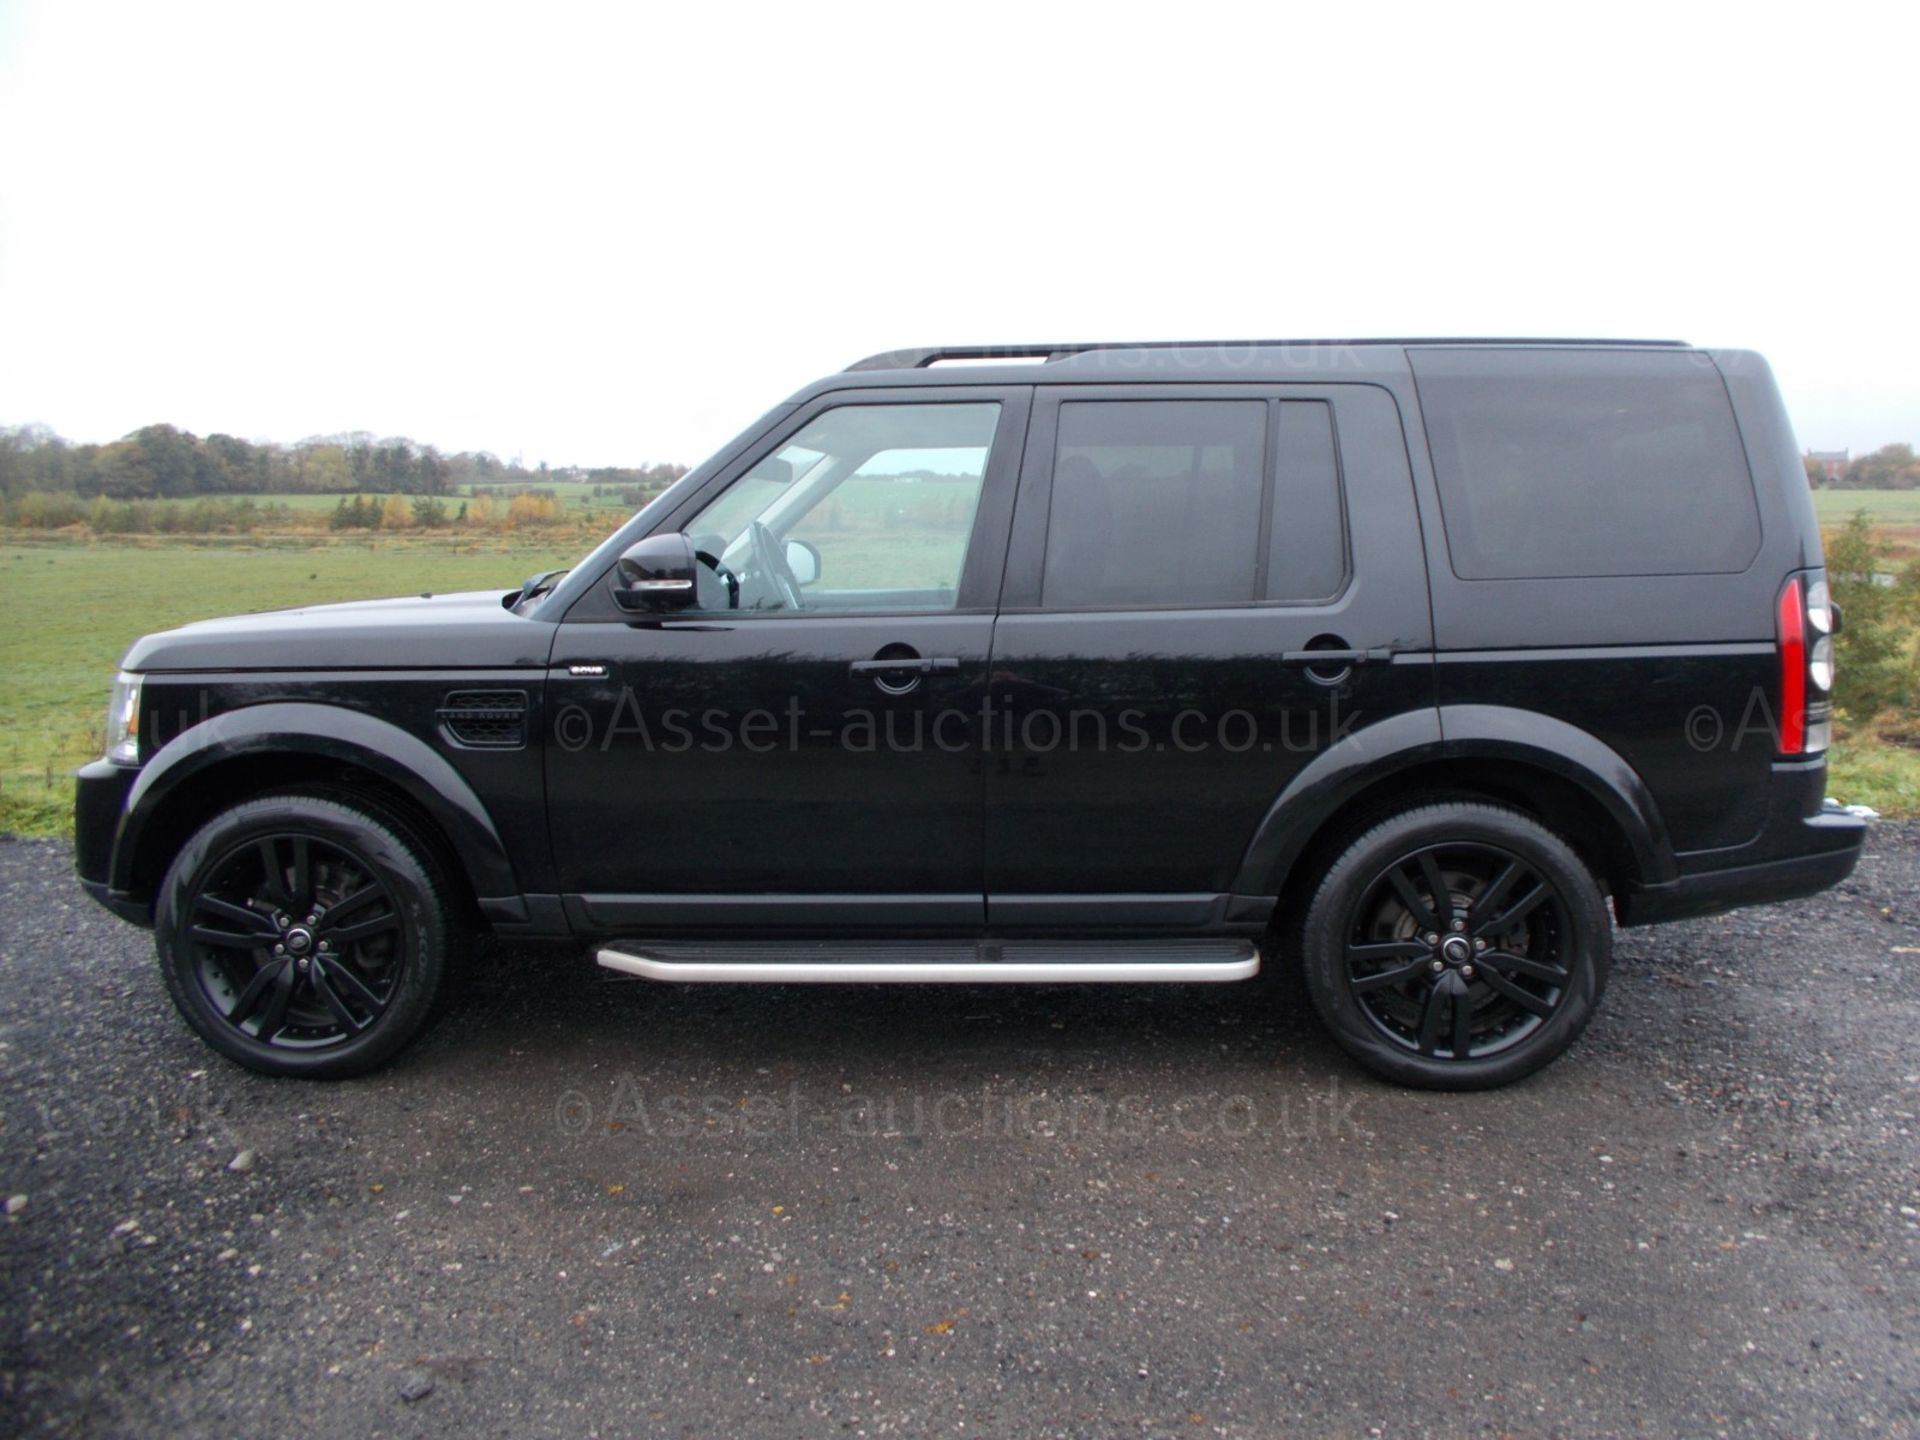 2015/64 LAND ROVER DISCOVERY HSE LUXURY SCV6 7 SEATER, 3.0 V6 PETROL SUPERCHARGED *NO VAT* - Image 4 of 27